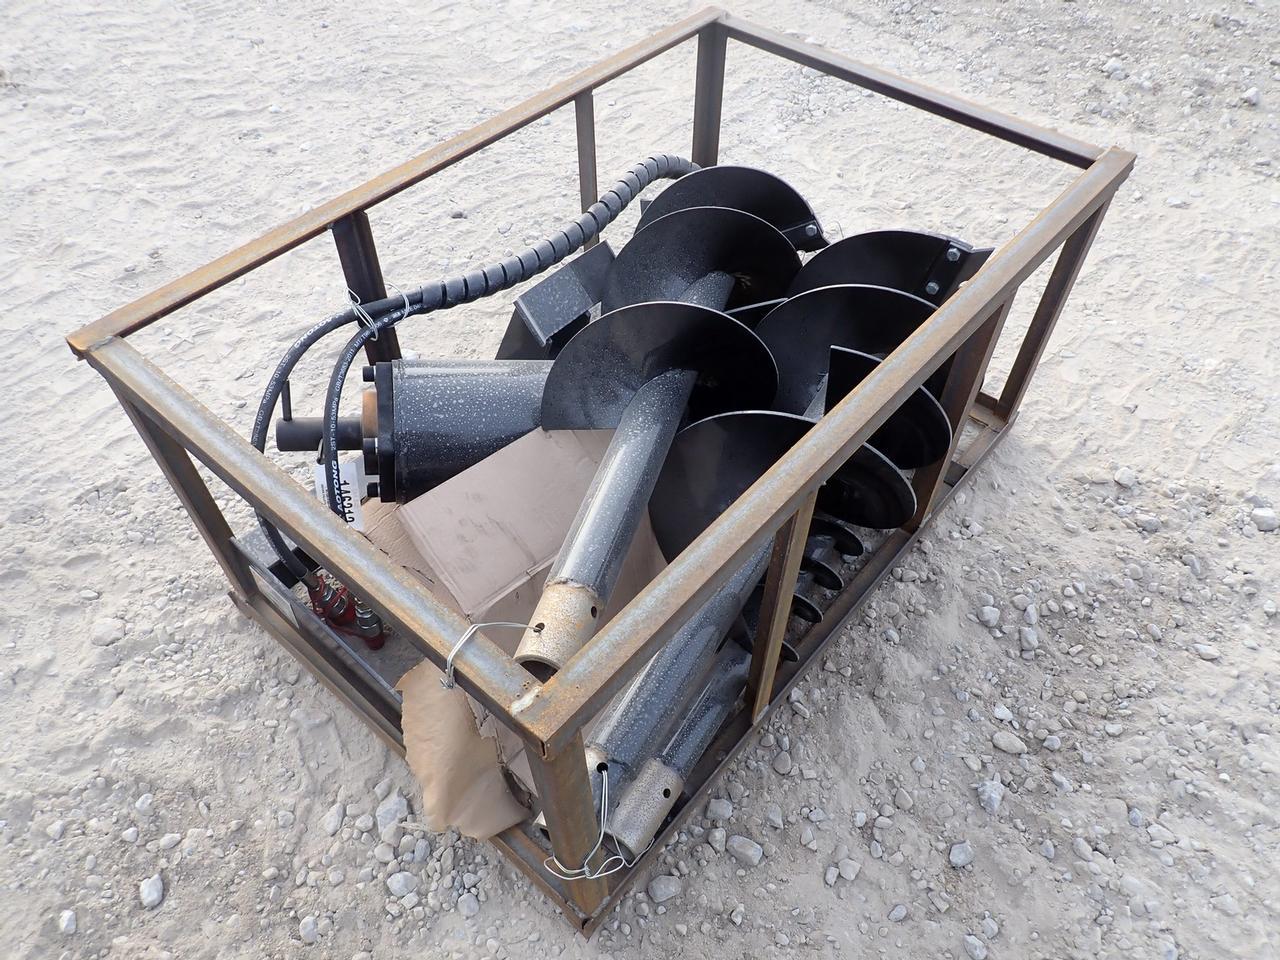 Mower King Skid Steer Post Hole Digger with 6", 12" & 14" Augers